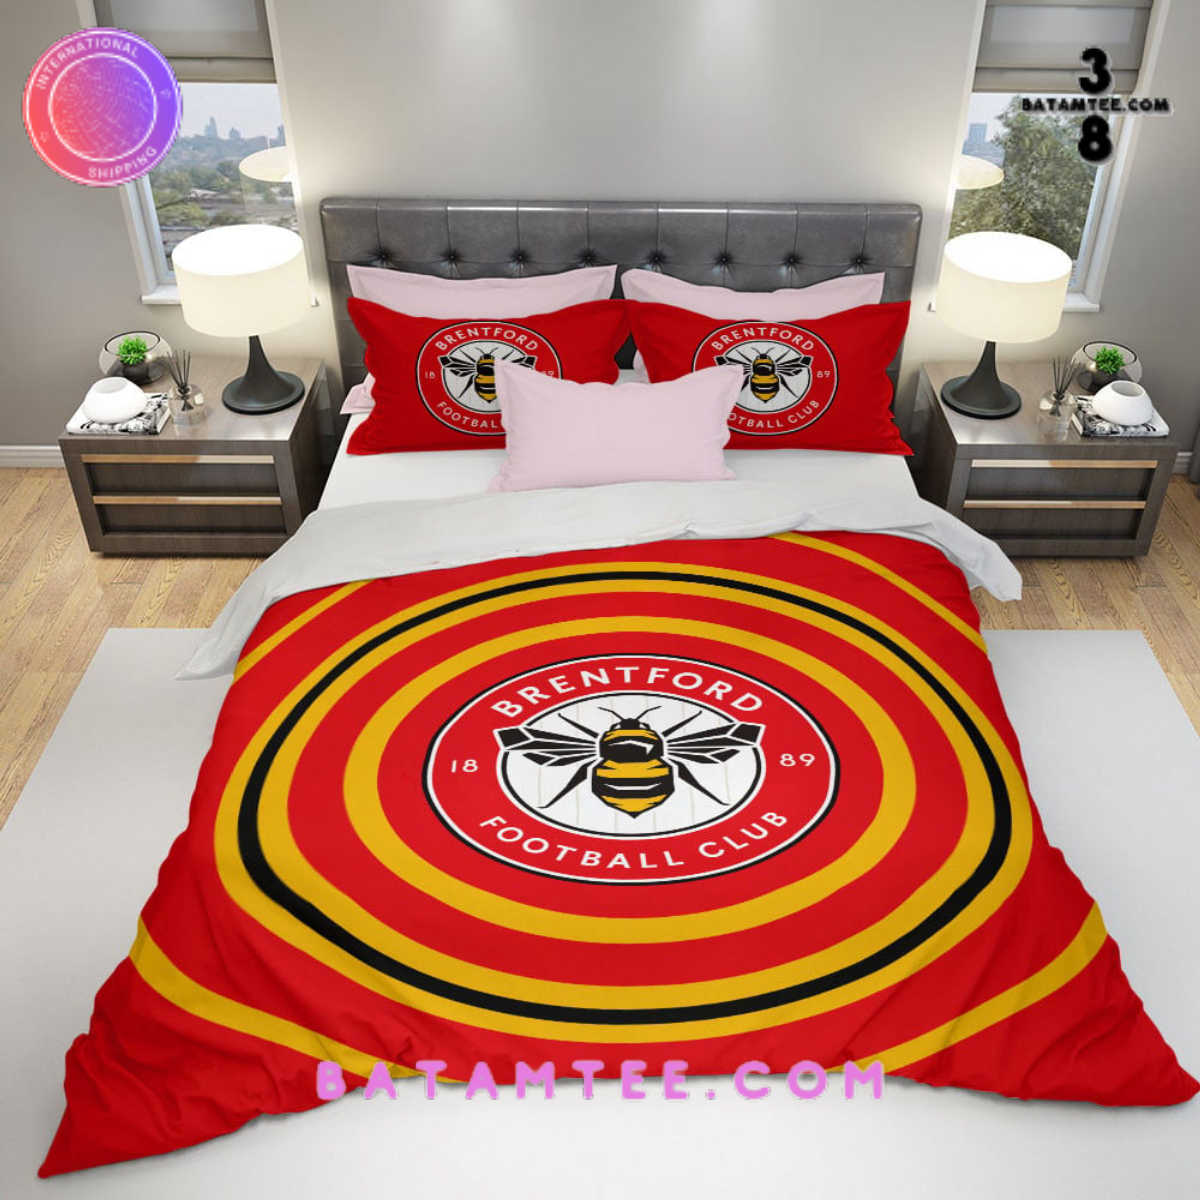 New Bedding Set collection for Brentford FC fans-Limited Edition